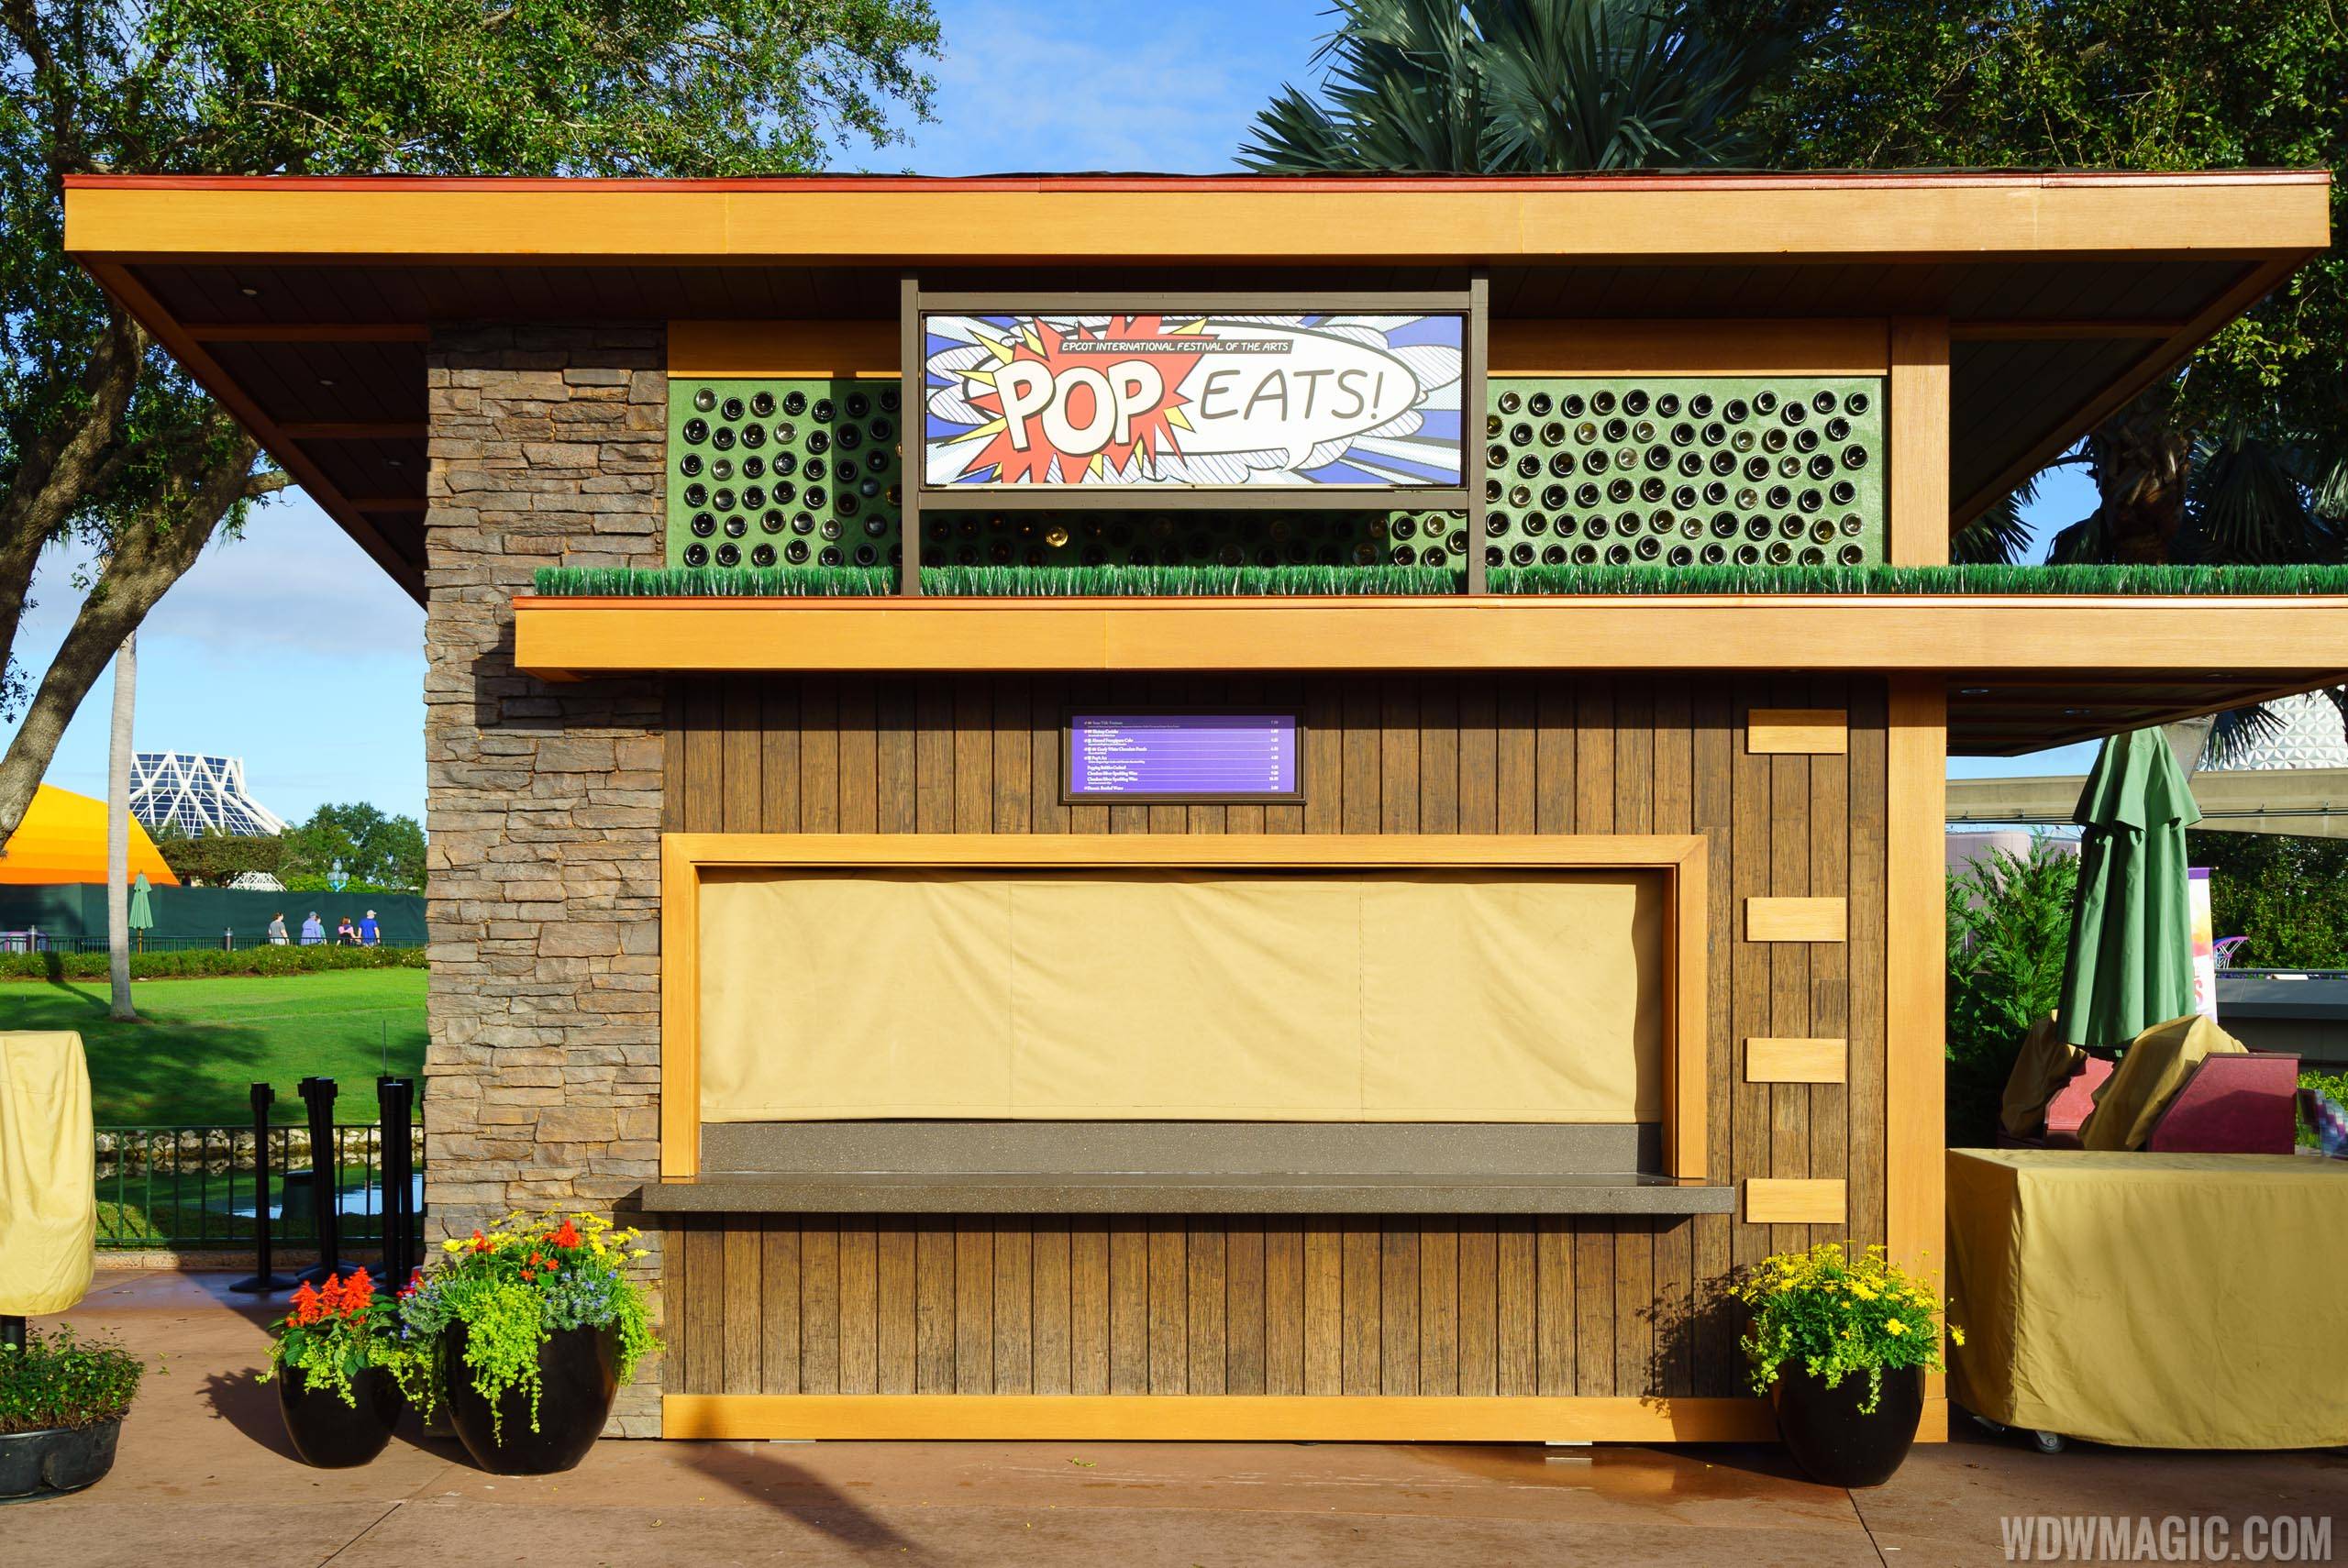 PHOTOS - Full menus and pricing for the Food Studio kiosks at Epcot's International Festival of the Arts